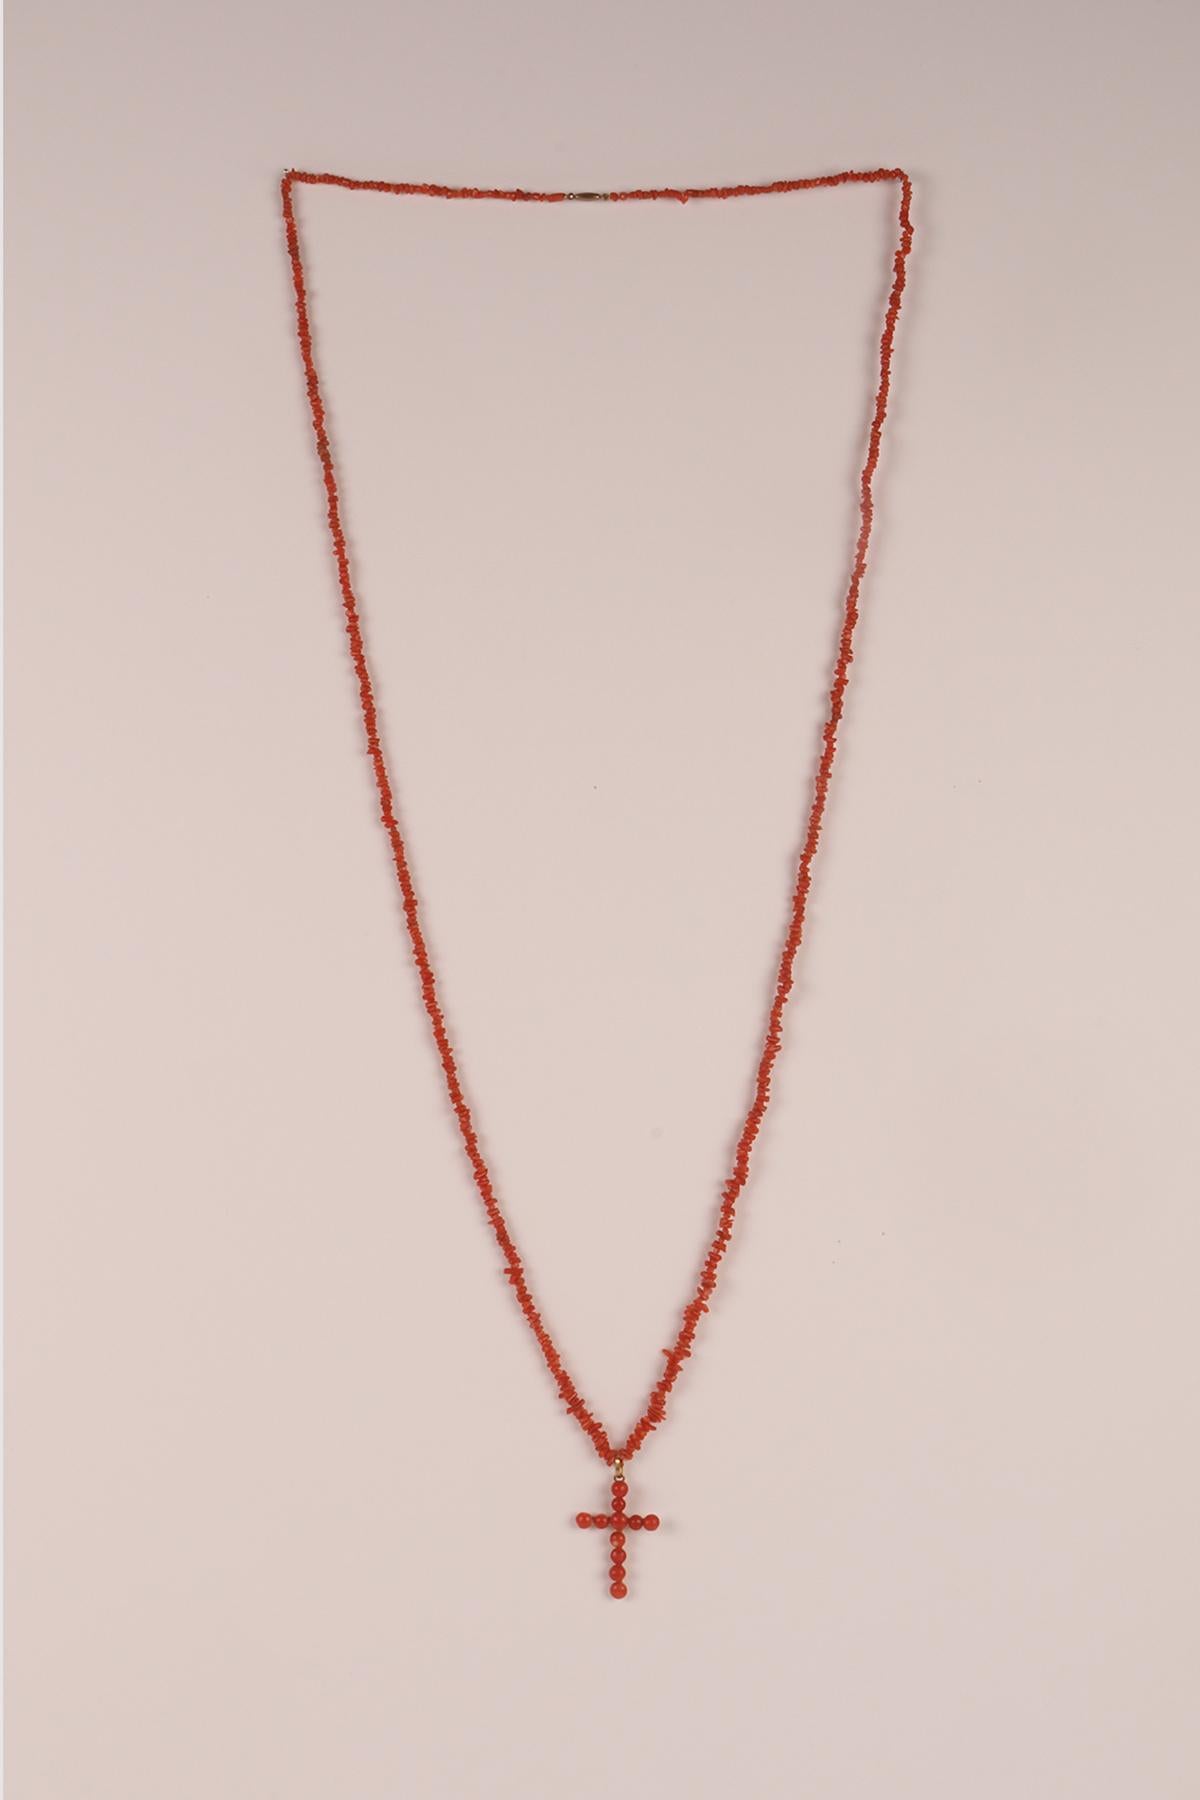 A thin and long necklace constructed from fragments of Sciacca (Sicily) coral perforated in an irregular sequence is closed by a low-carat gold clasp with an elongated barrel. A regular cross hangs from the necklace, made with a succession of